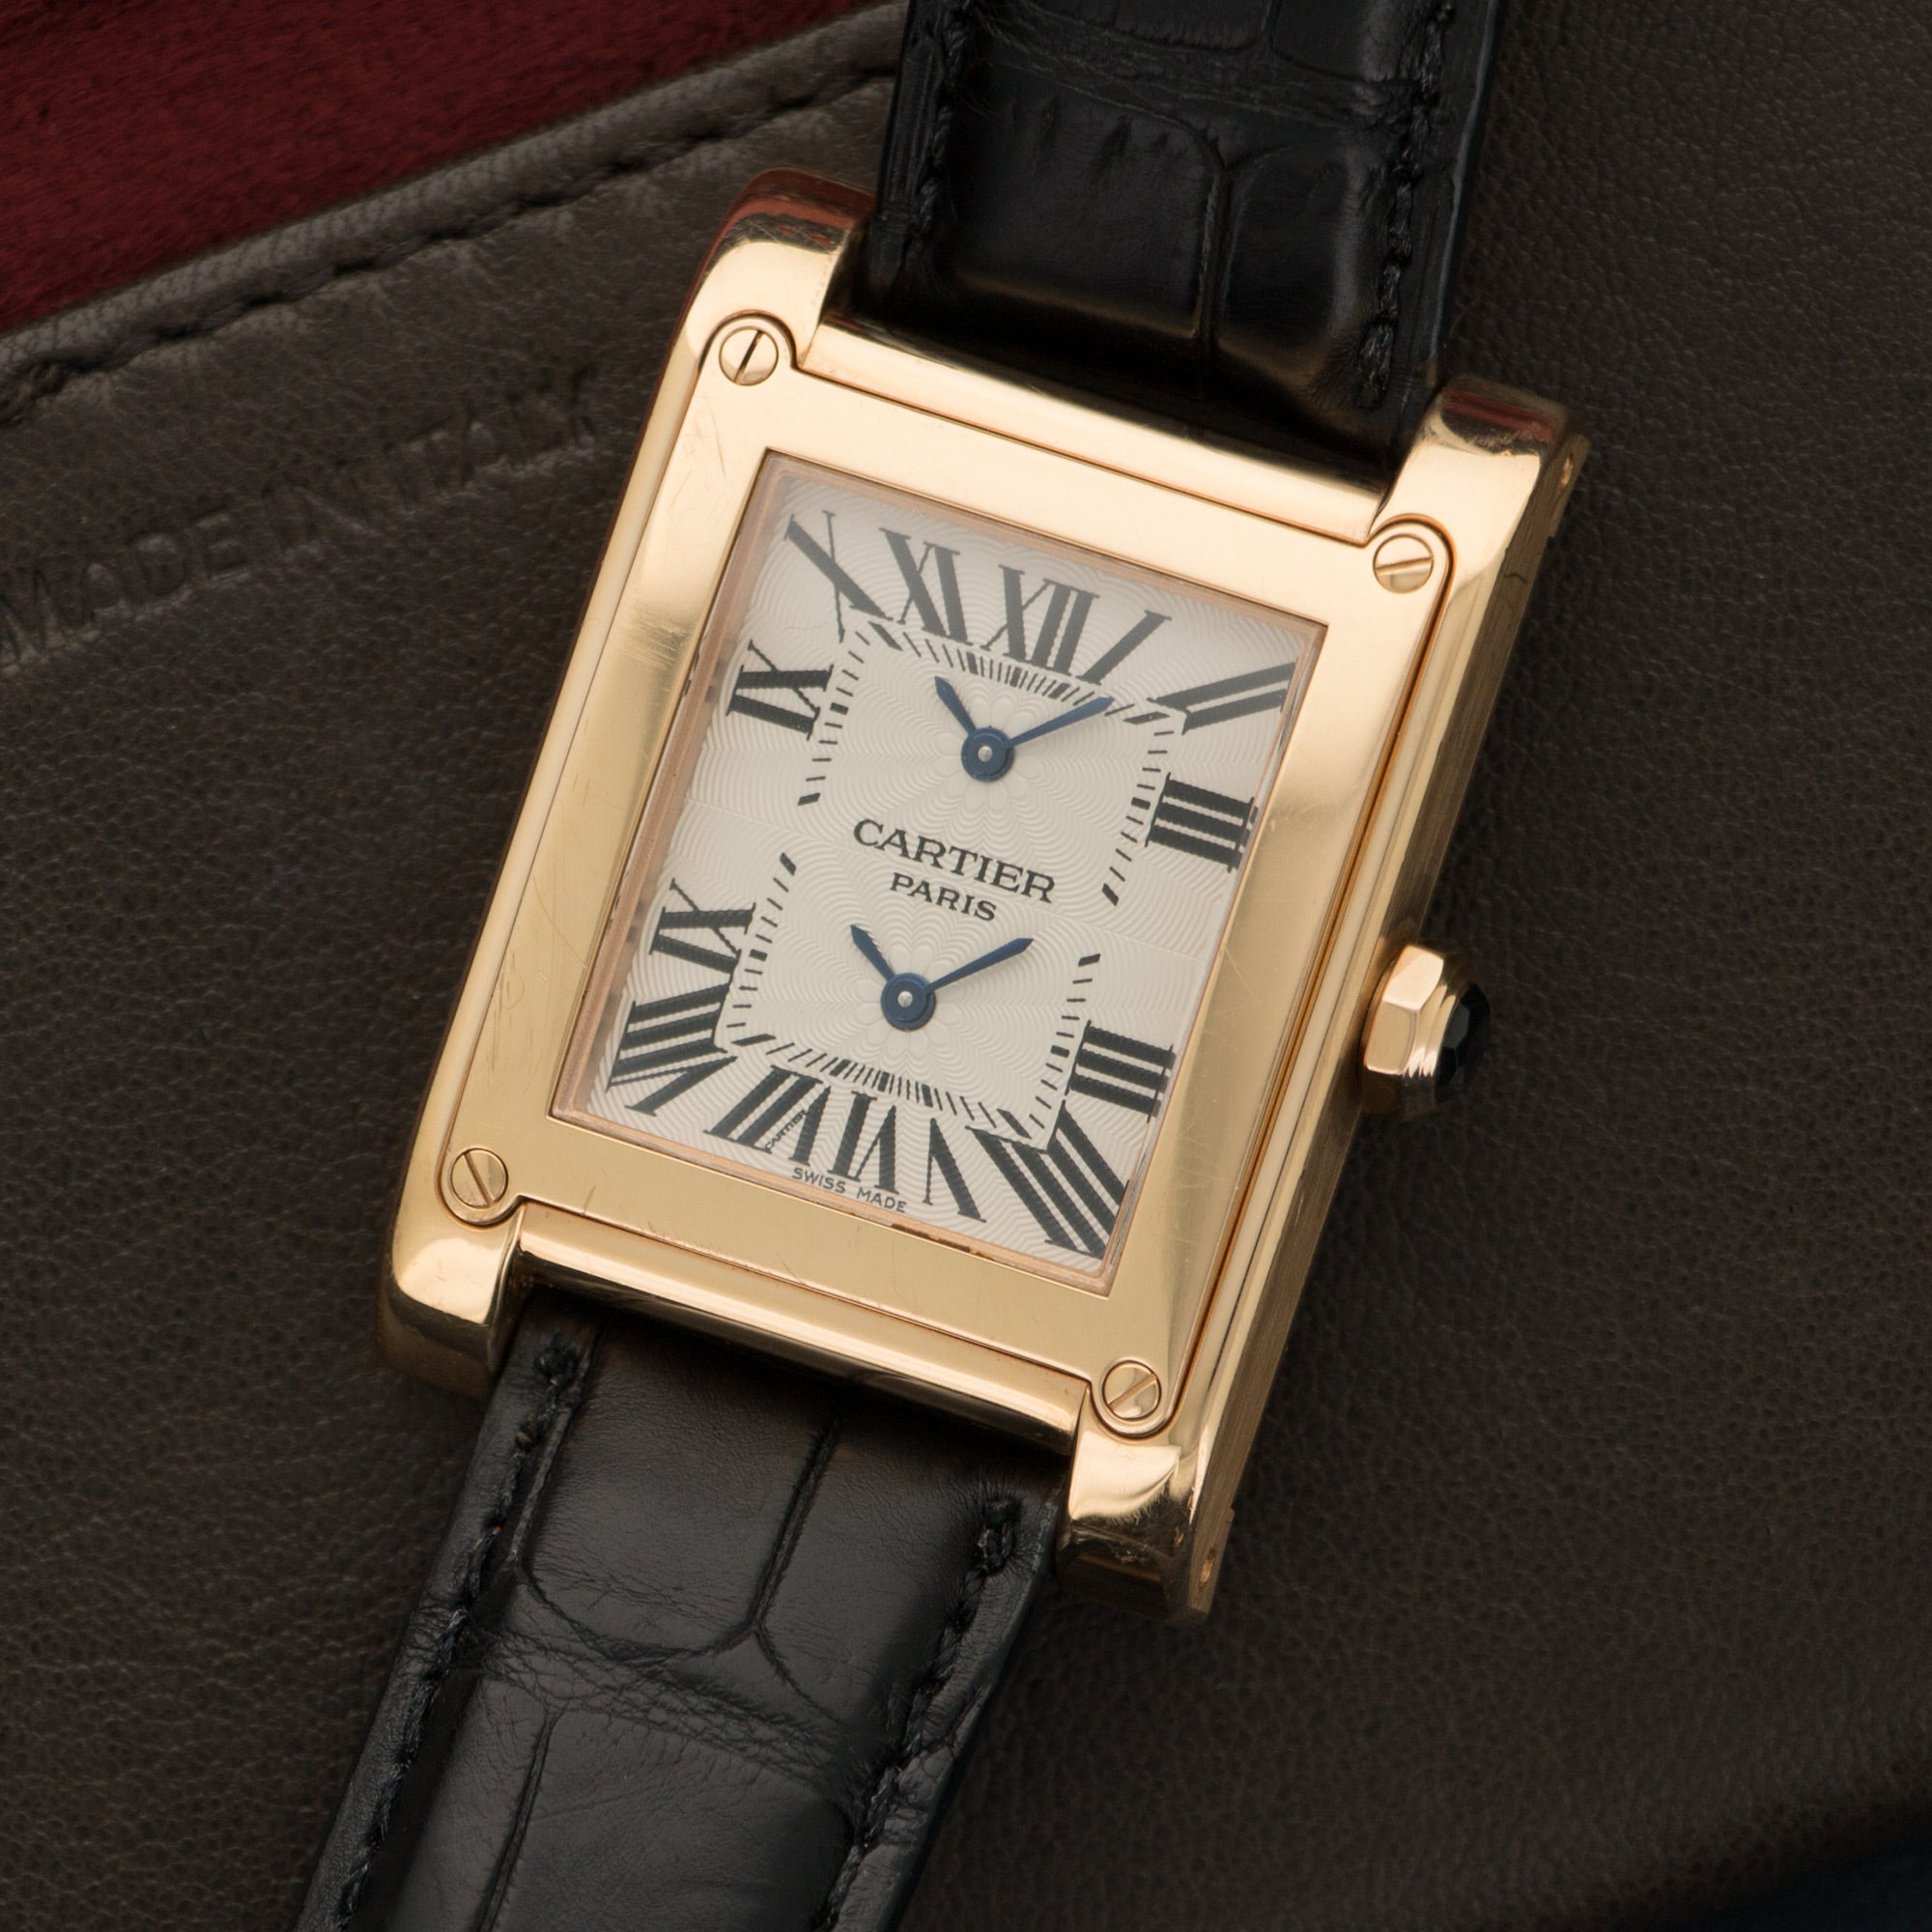 Cartier - Cartier Rose Gold Tank A Vis Dual Time Watch Ref. W1537651 - The Keystone Watches